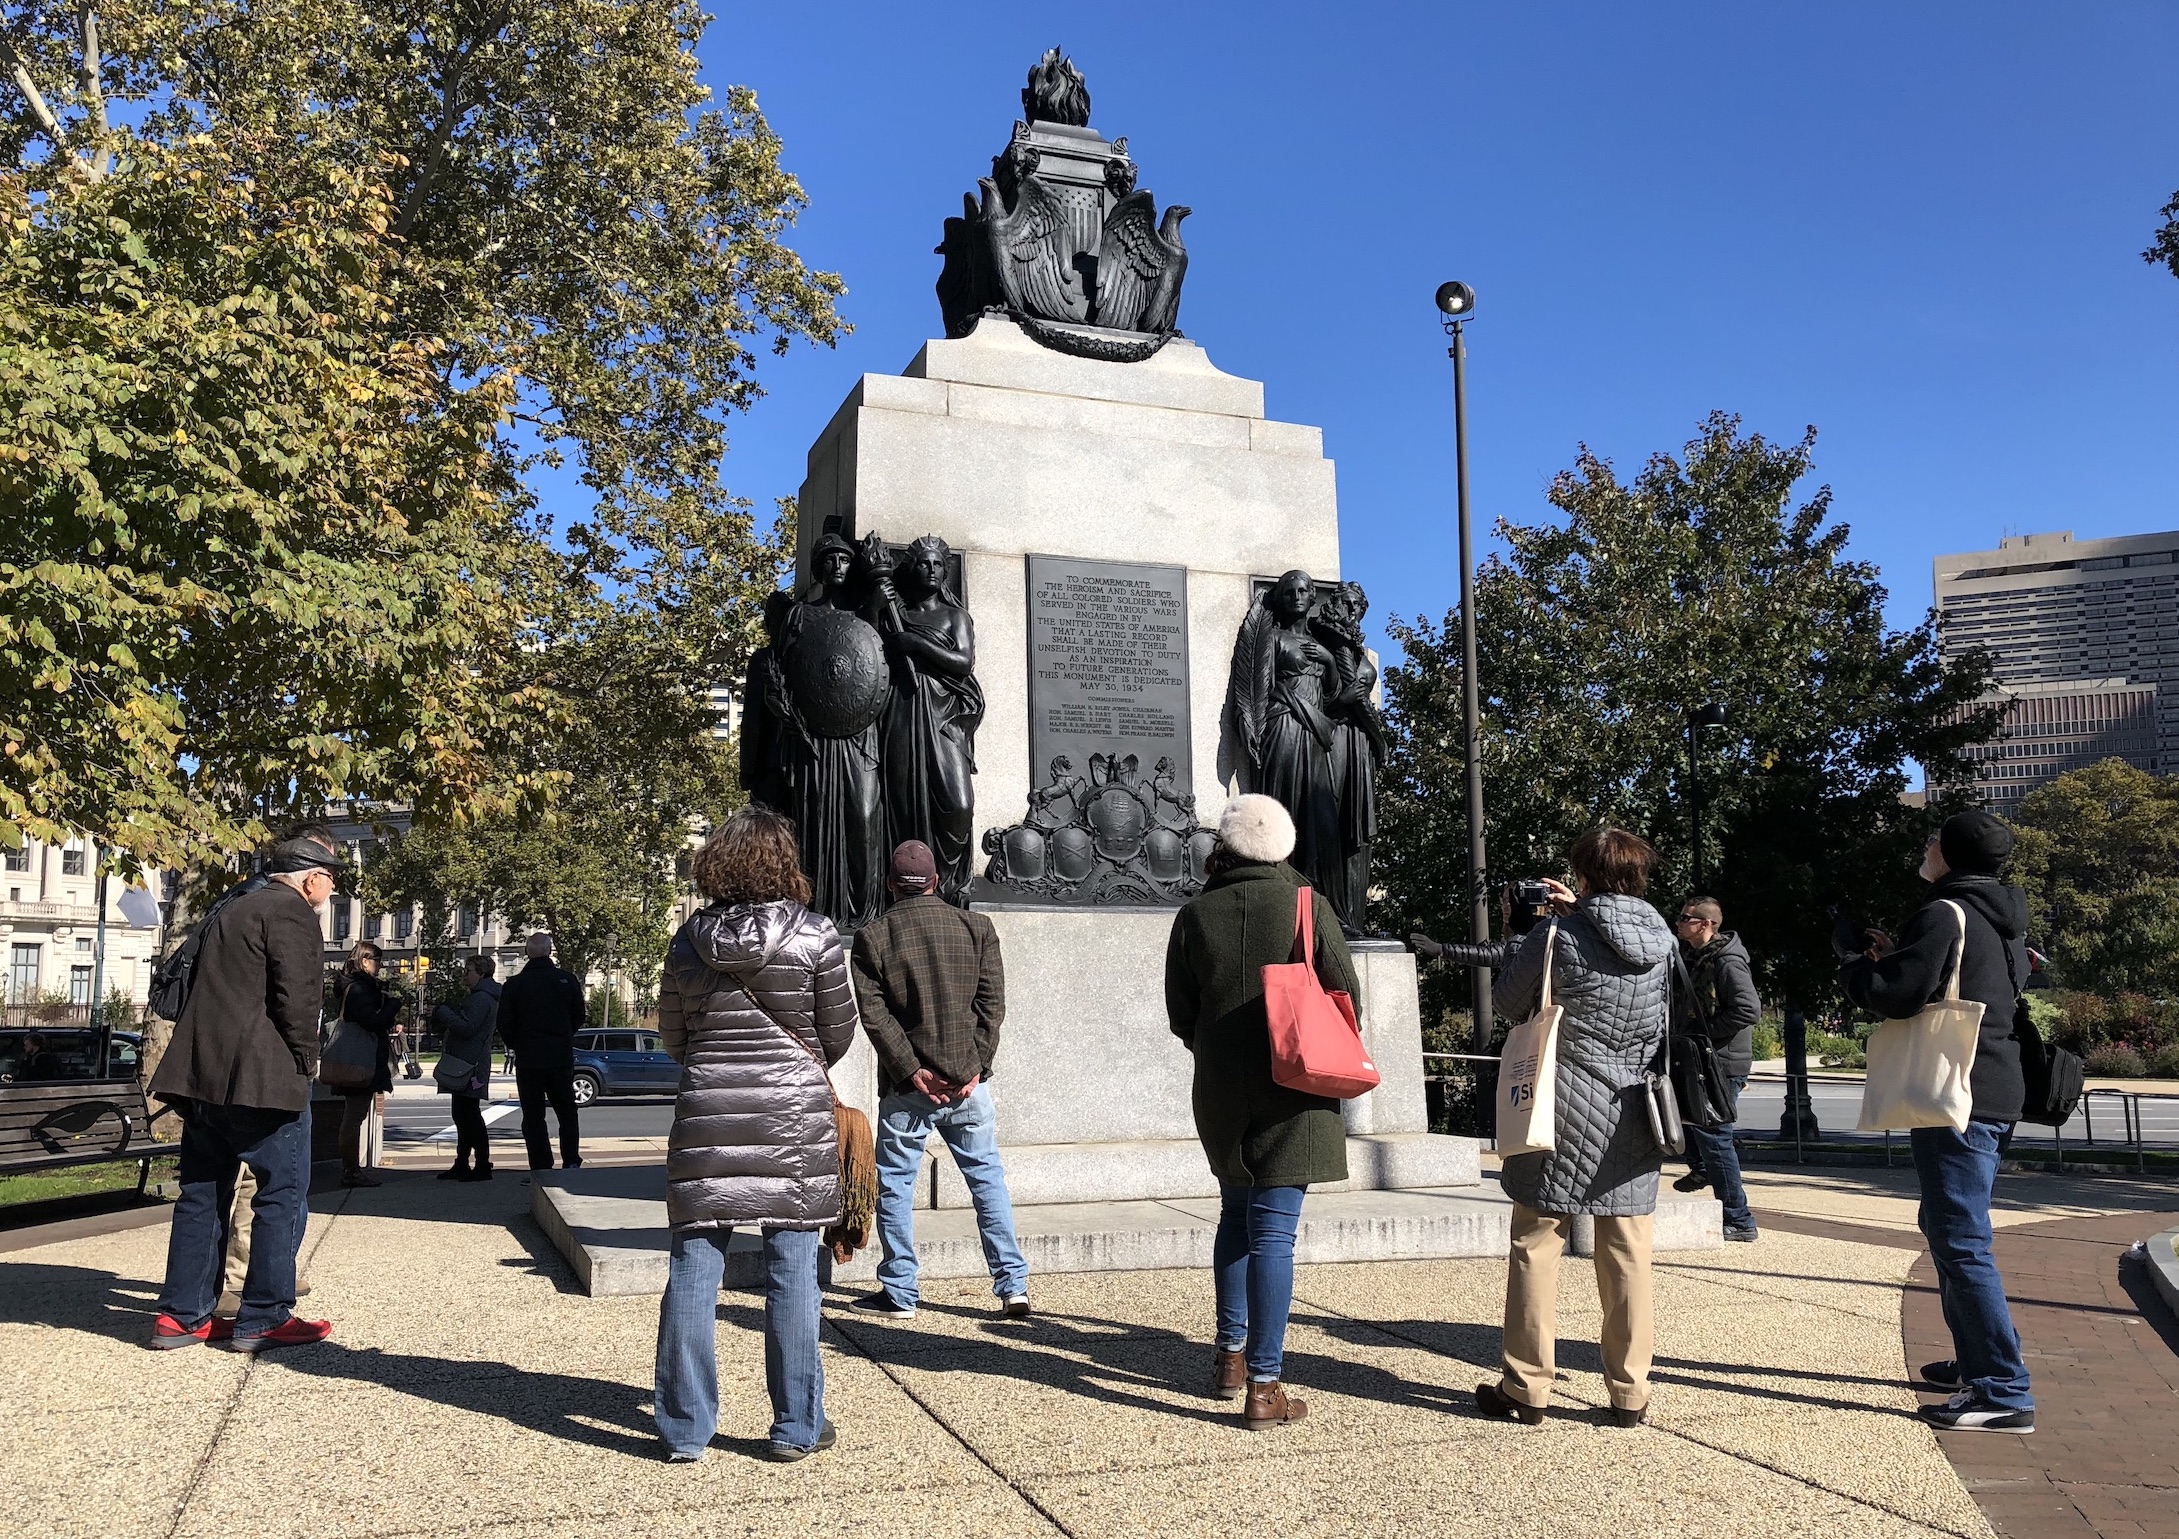 A group on an outdoor sculpture tour around the All Wars Memorial, looking up at the memorial and taking photos on a sunny fall day on the Parkway.